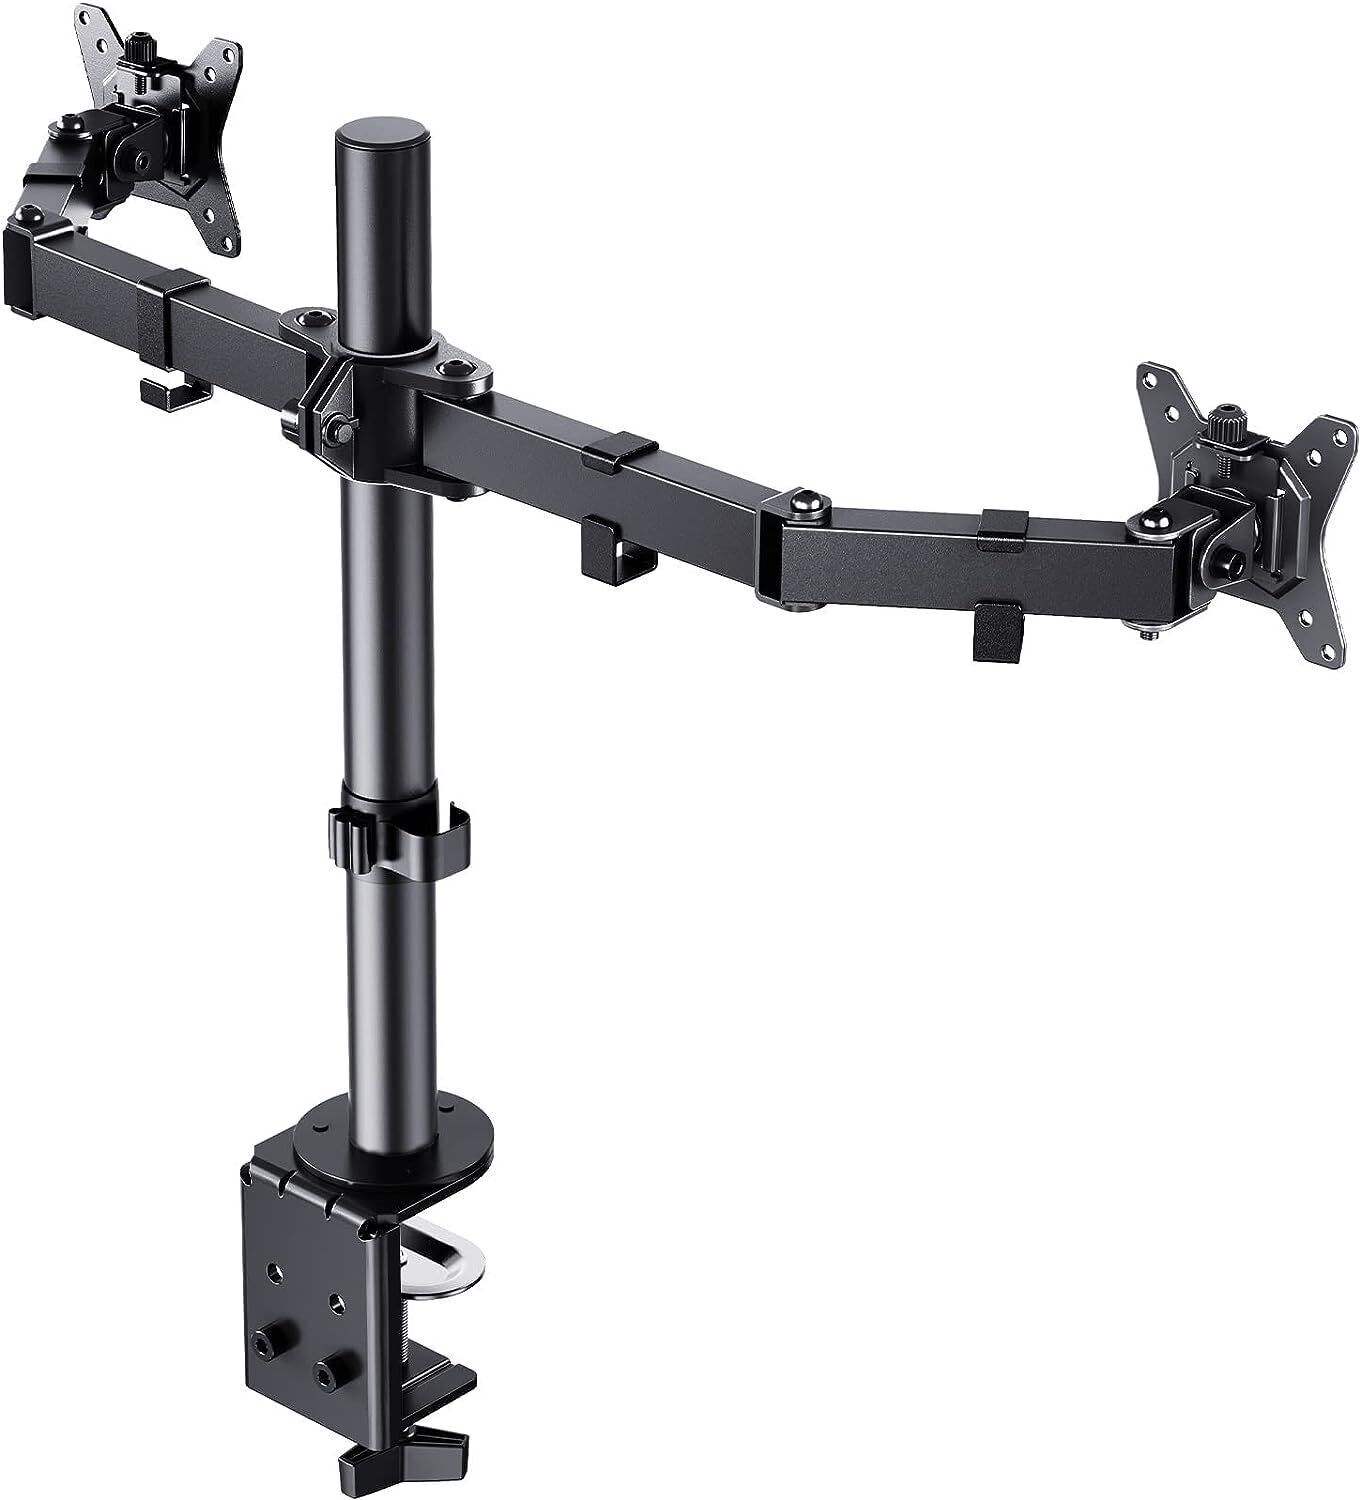 ErGear Dual Monitor Desk Mount Fully Adjustable Dual Monitor Arm for 2 Comput...